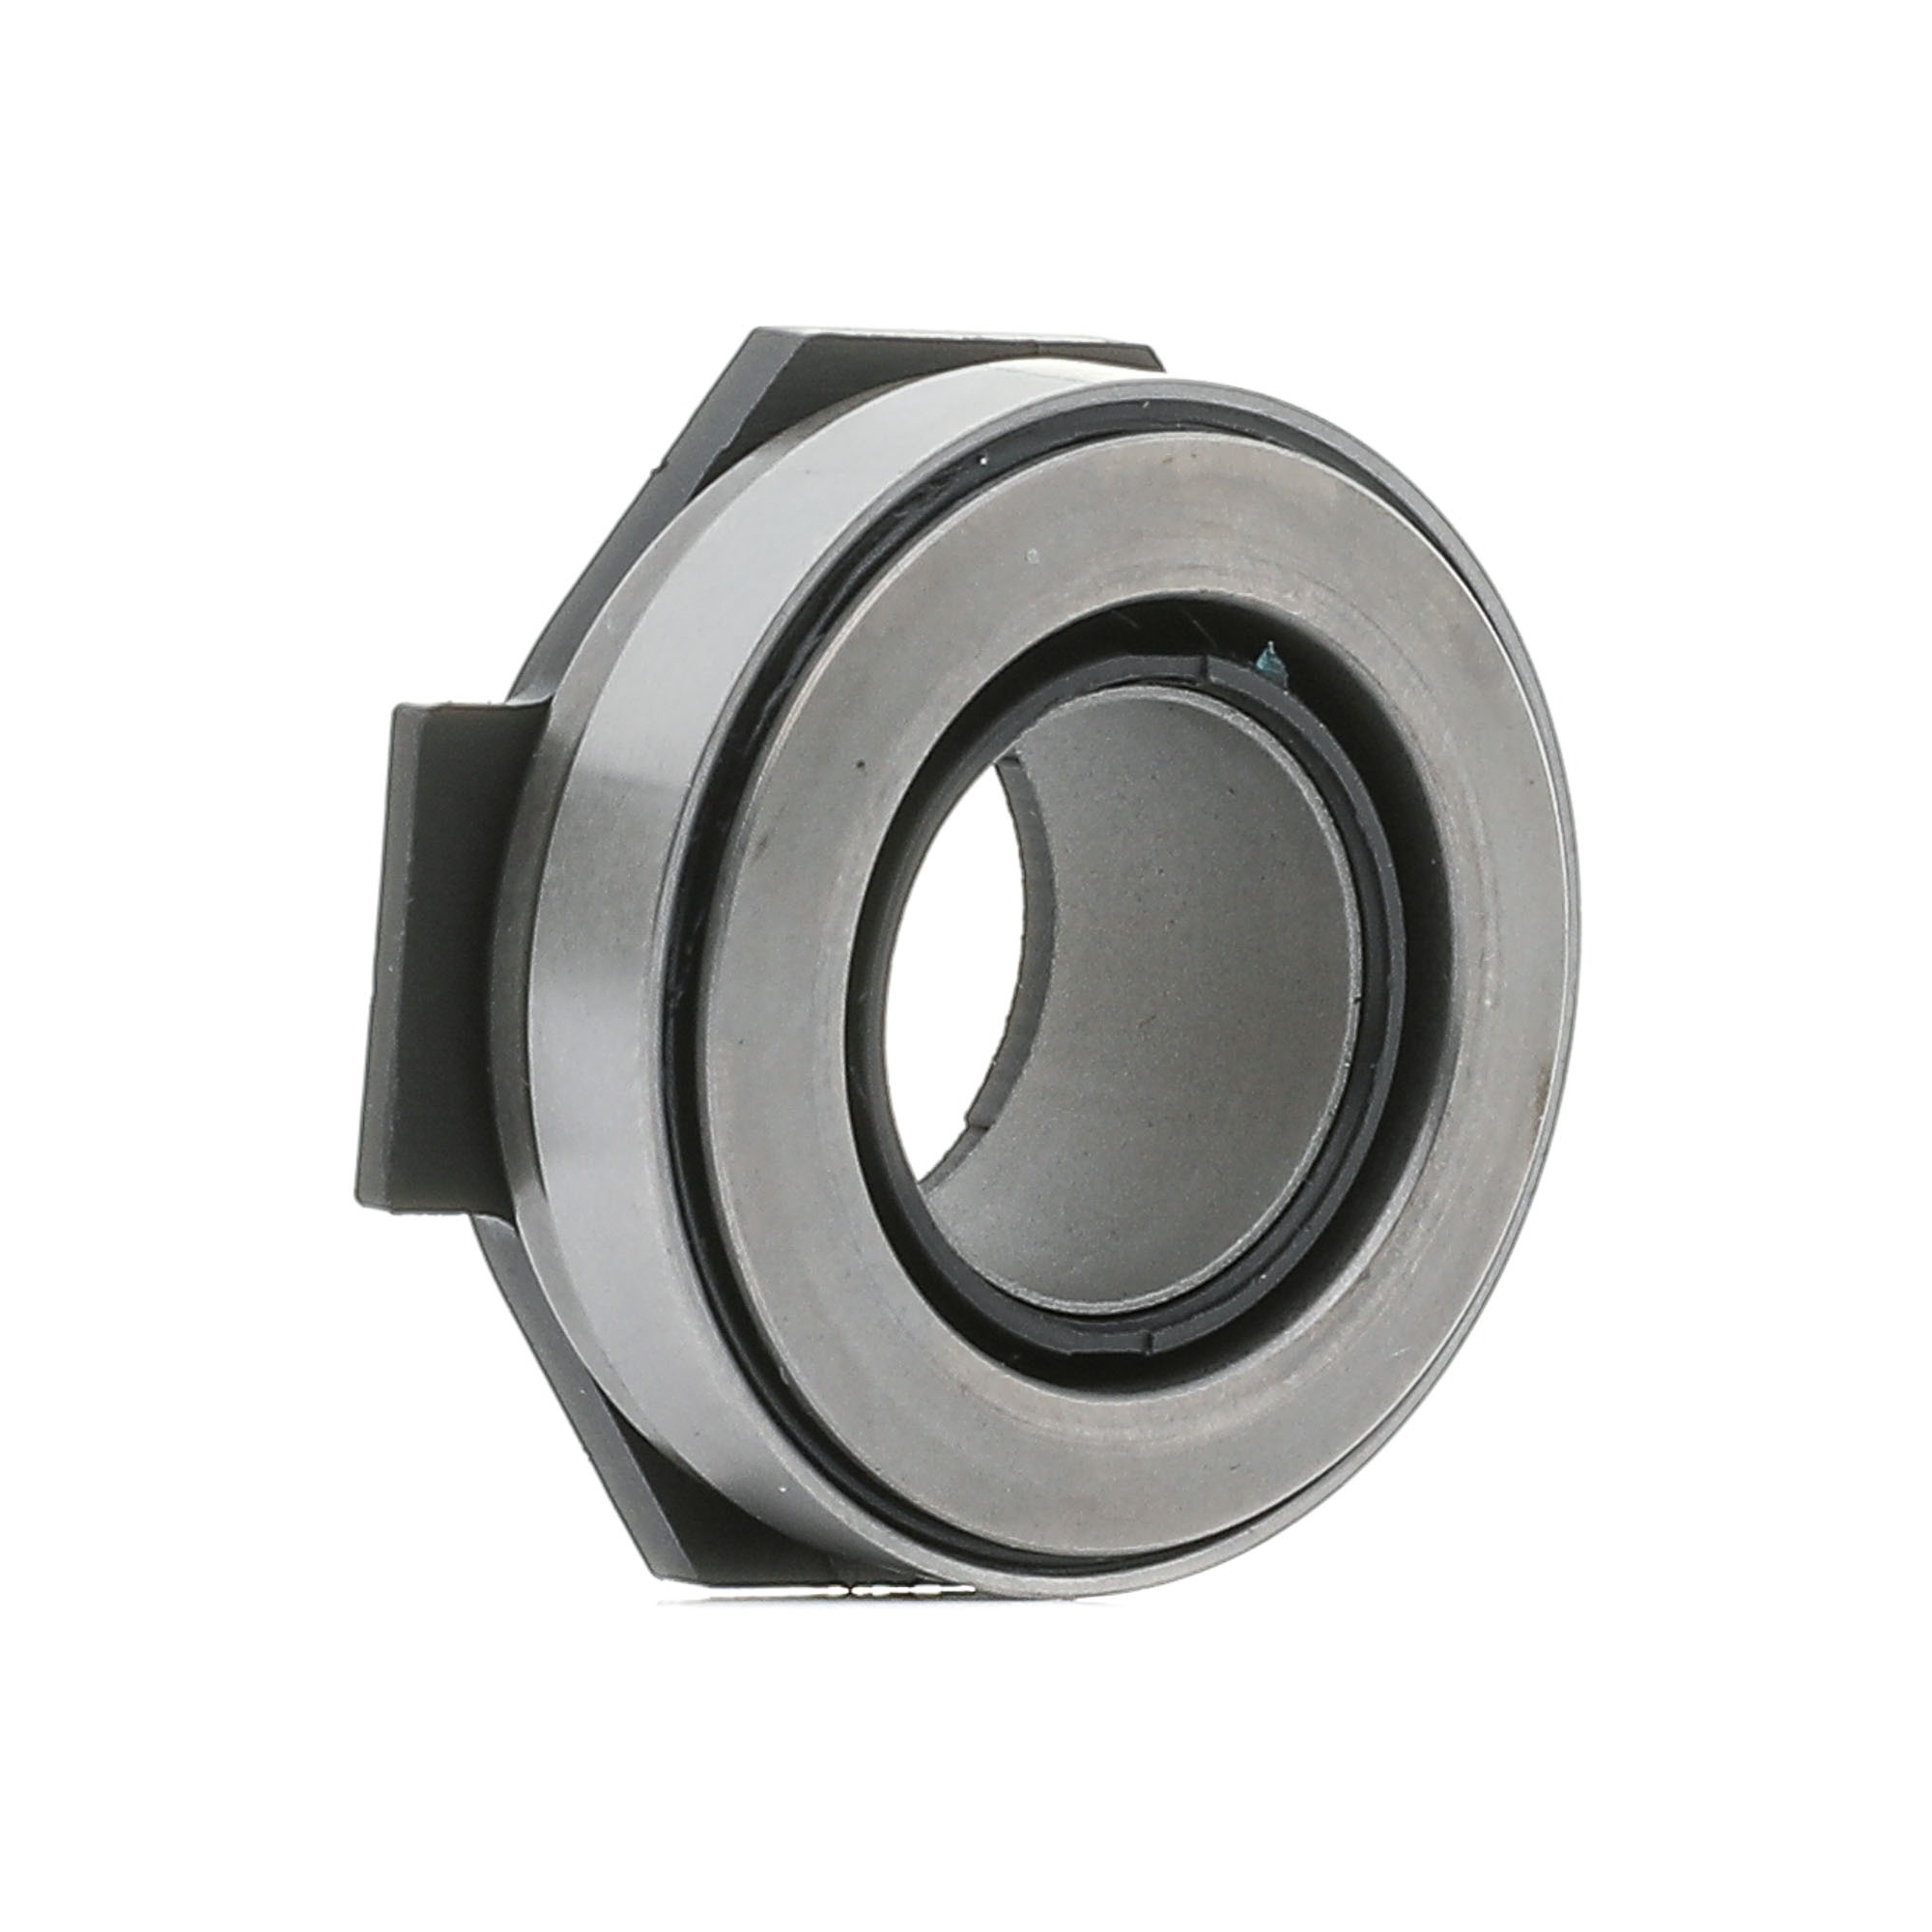 Image of RIDEX Clutch Release Bearing OPEL,FORD,FIAT 48R0070 55220302,46466726,46515184 Clutch Bearing,Release Bearing,Releaser 46809531,55220302,55234222